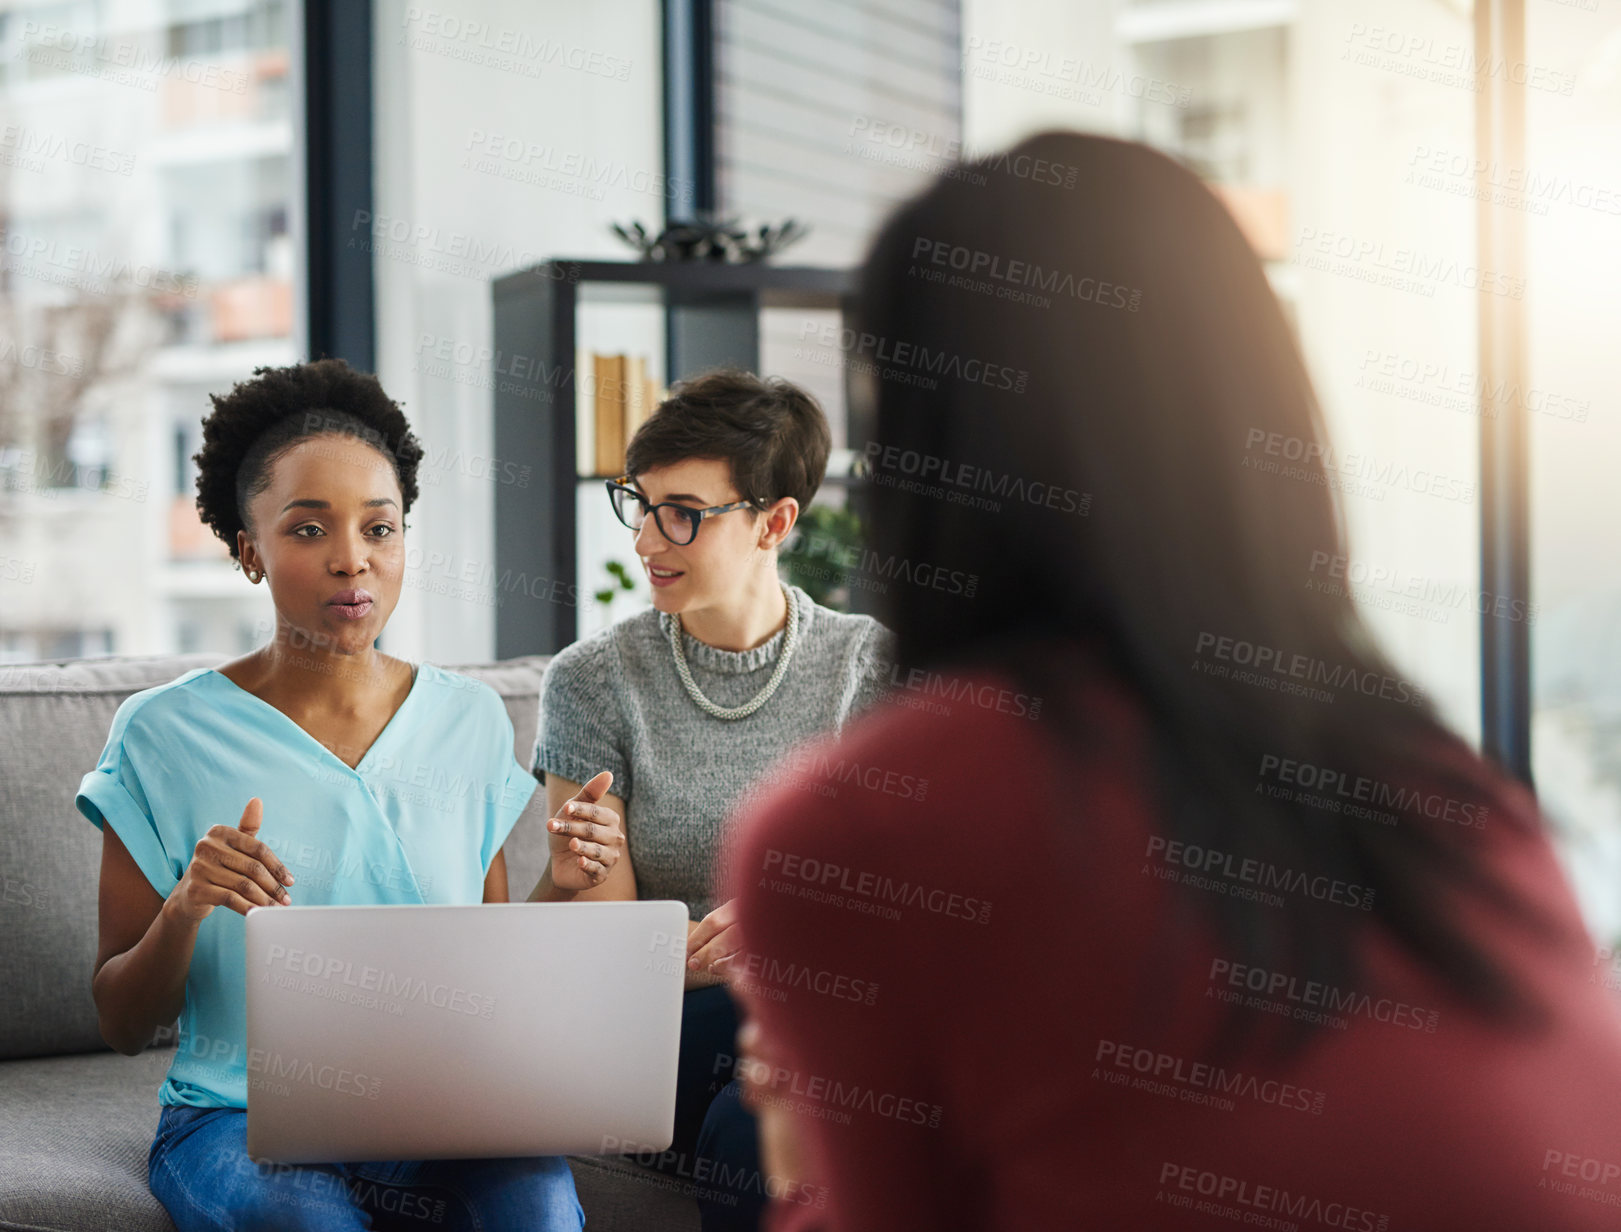 Buy stock photo Shot of businesspeople having a discussion in the office